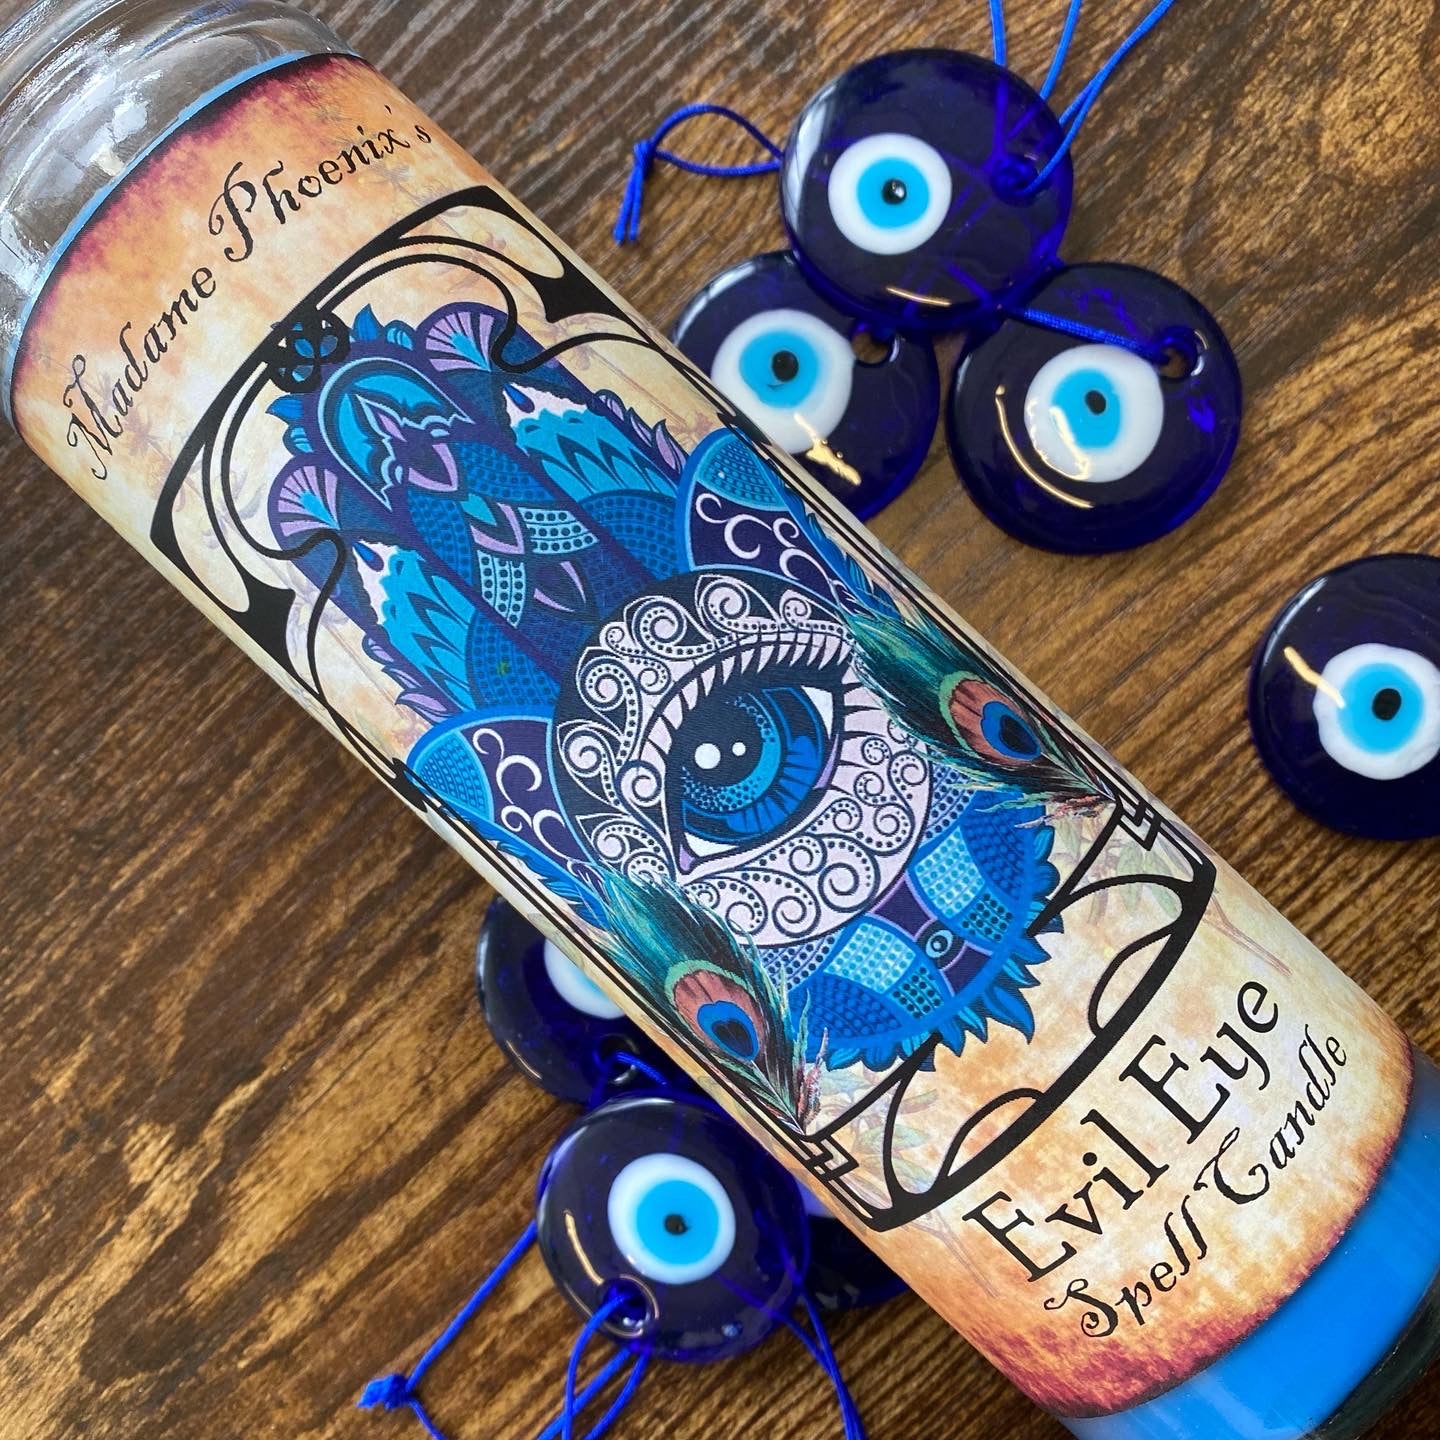 Evil Eye Protection 7 Day Spell Candle